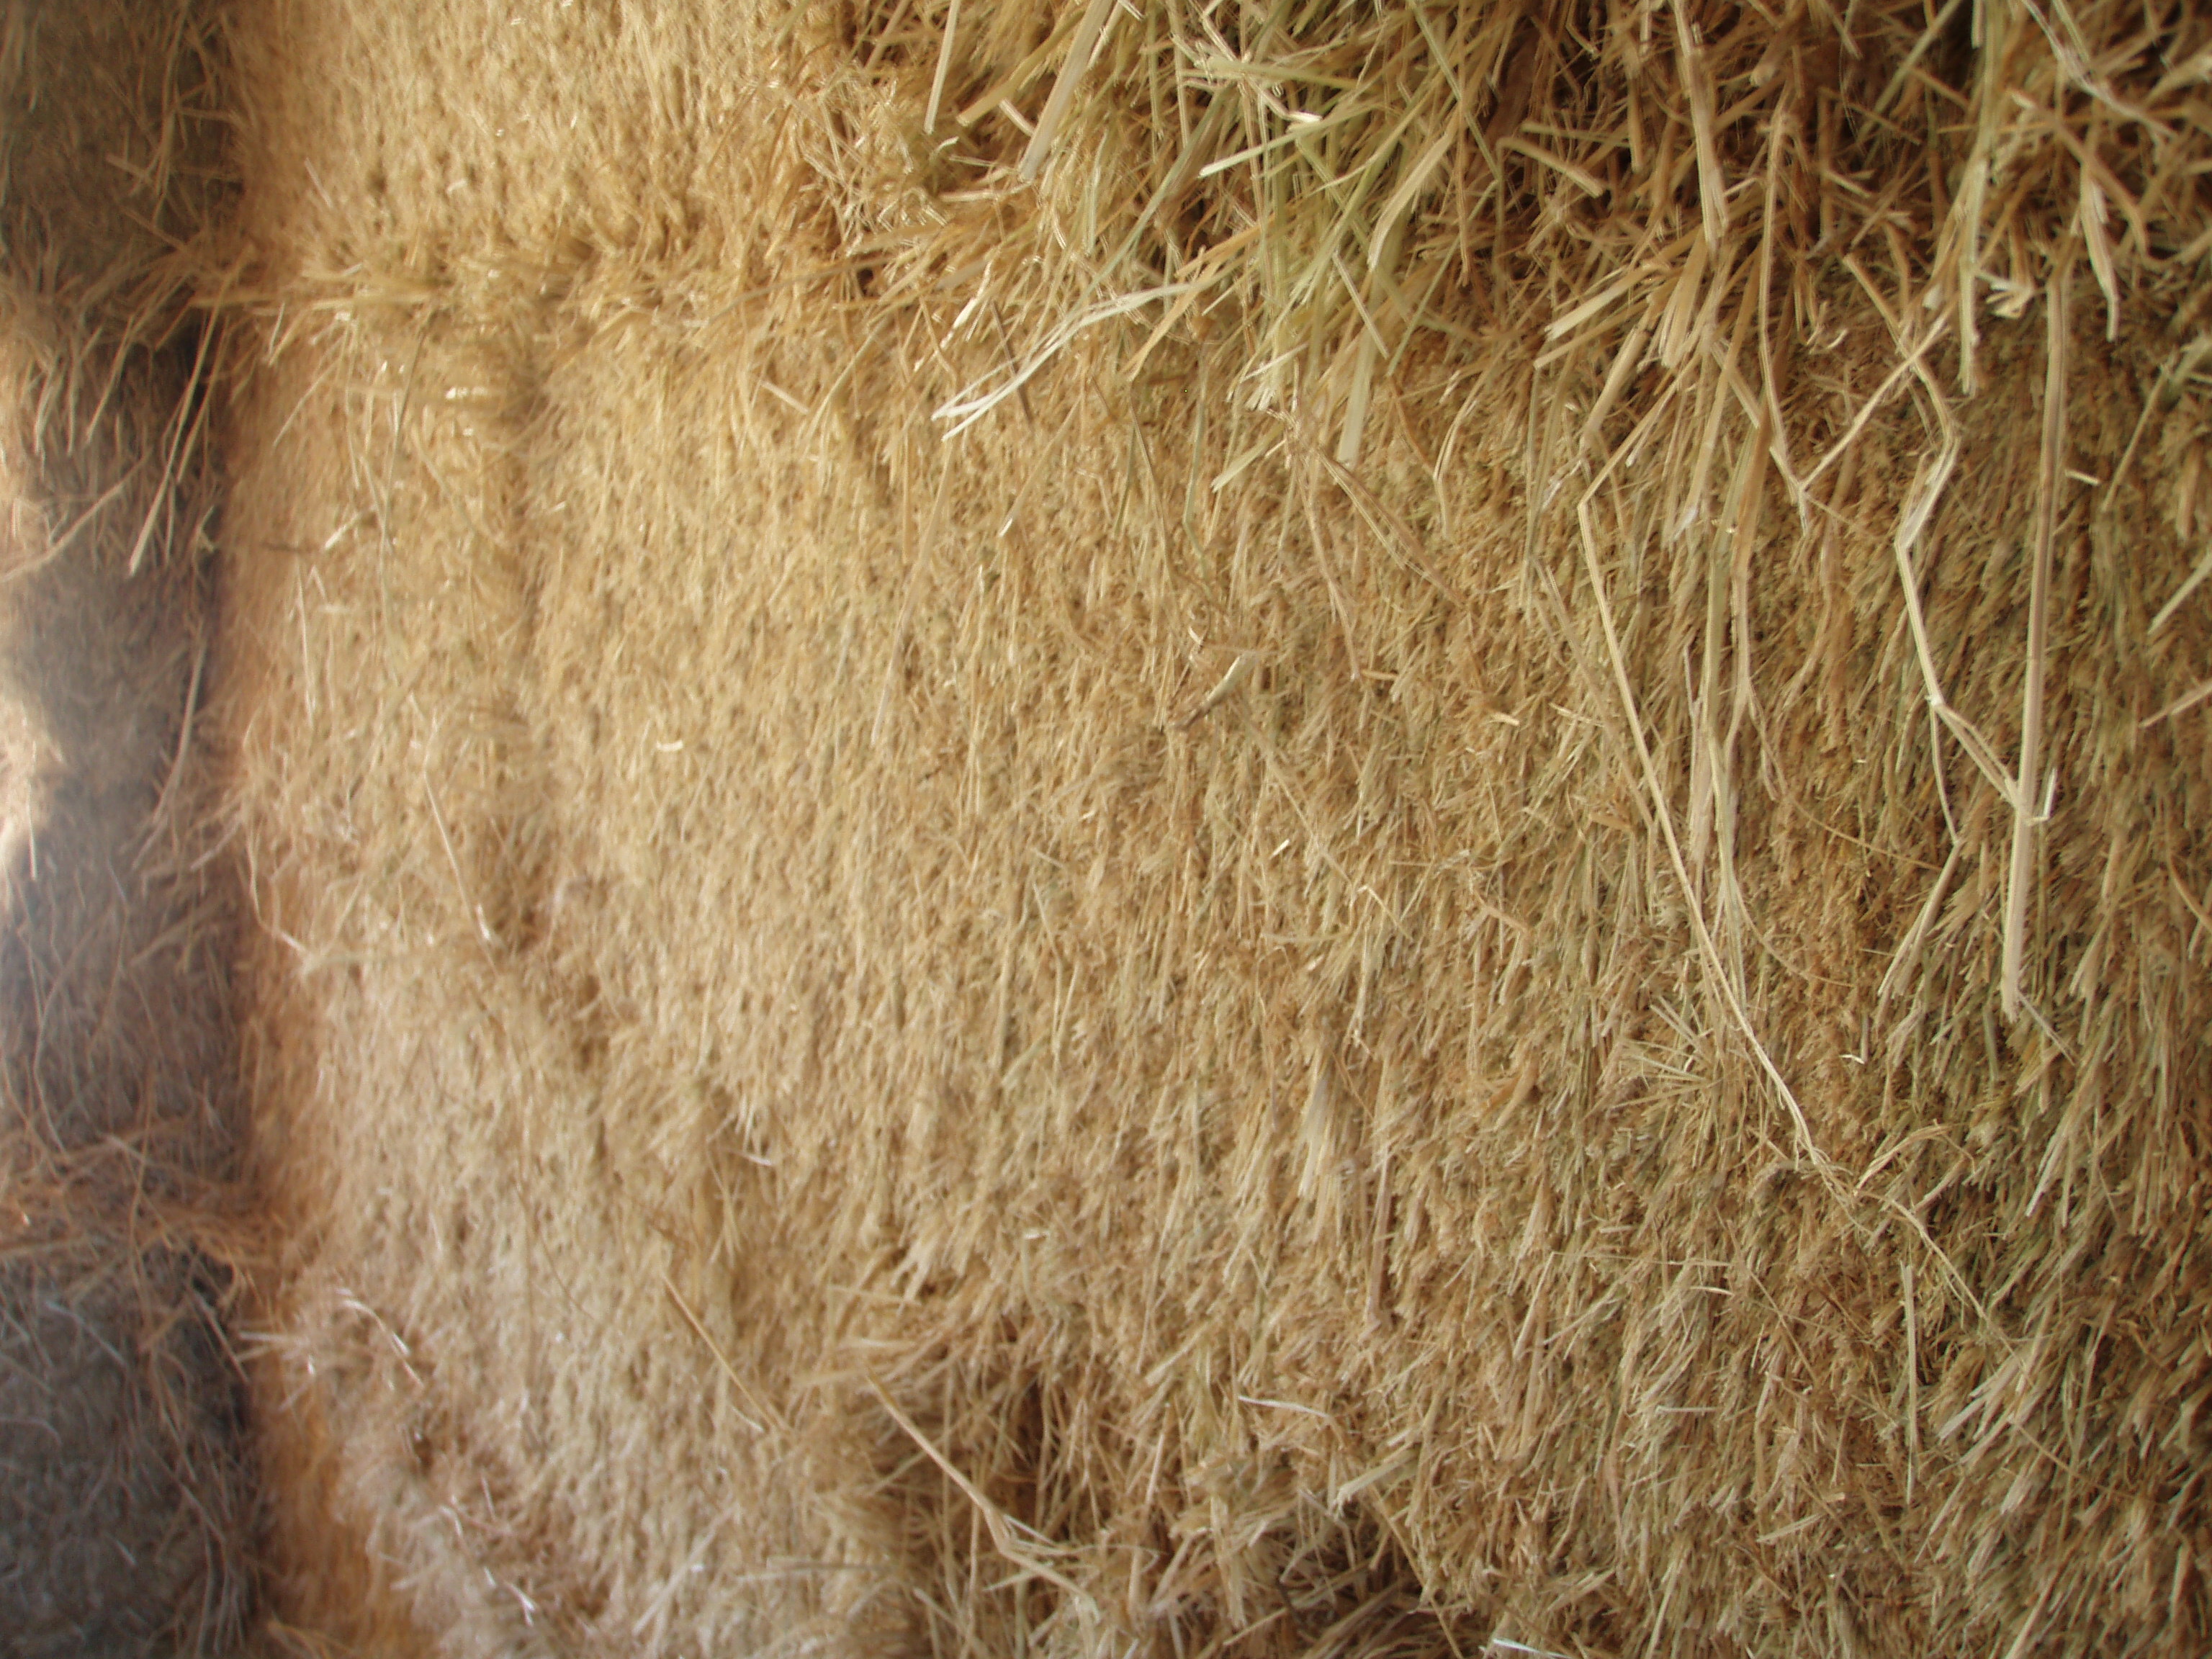 Resizing Straw Bales with a Portable Sawmill